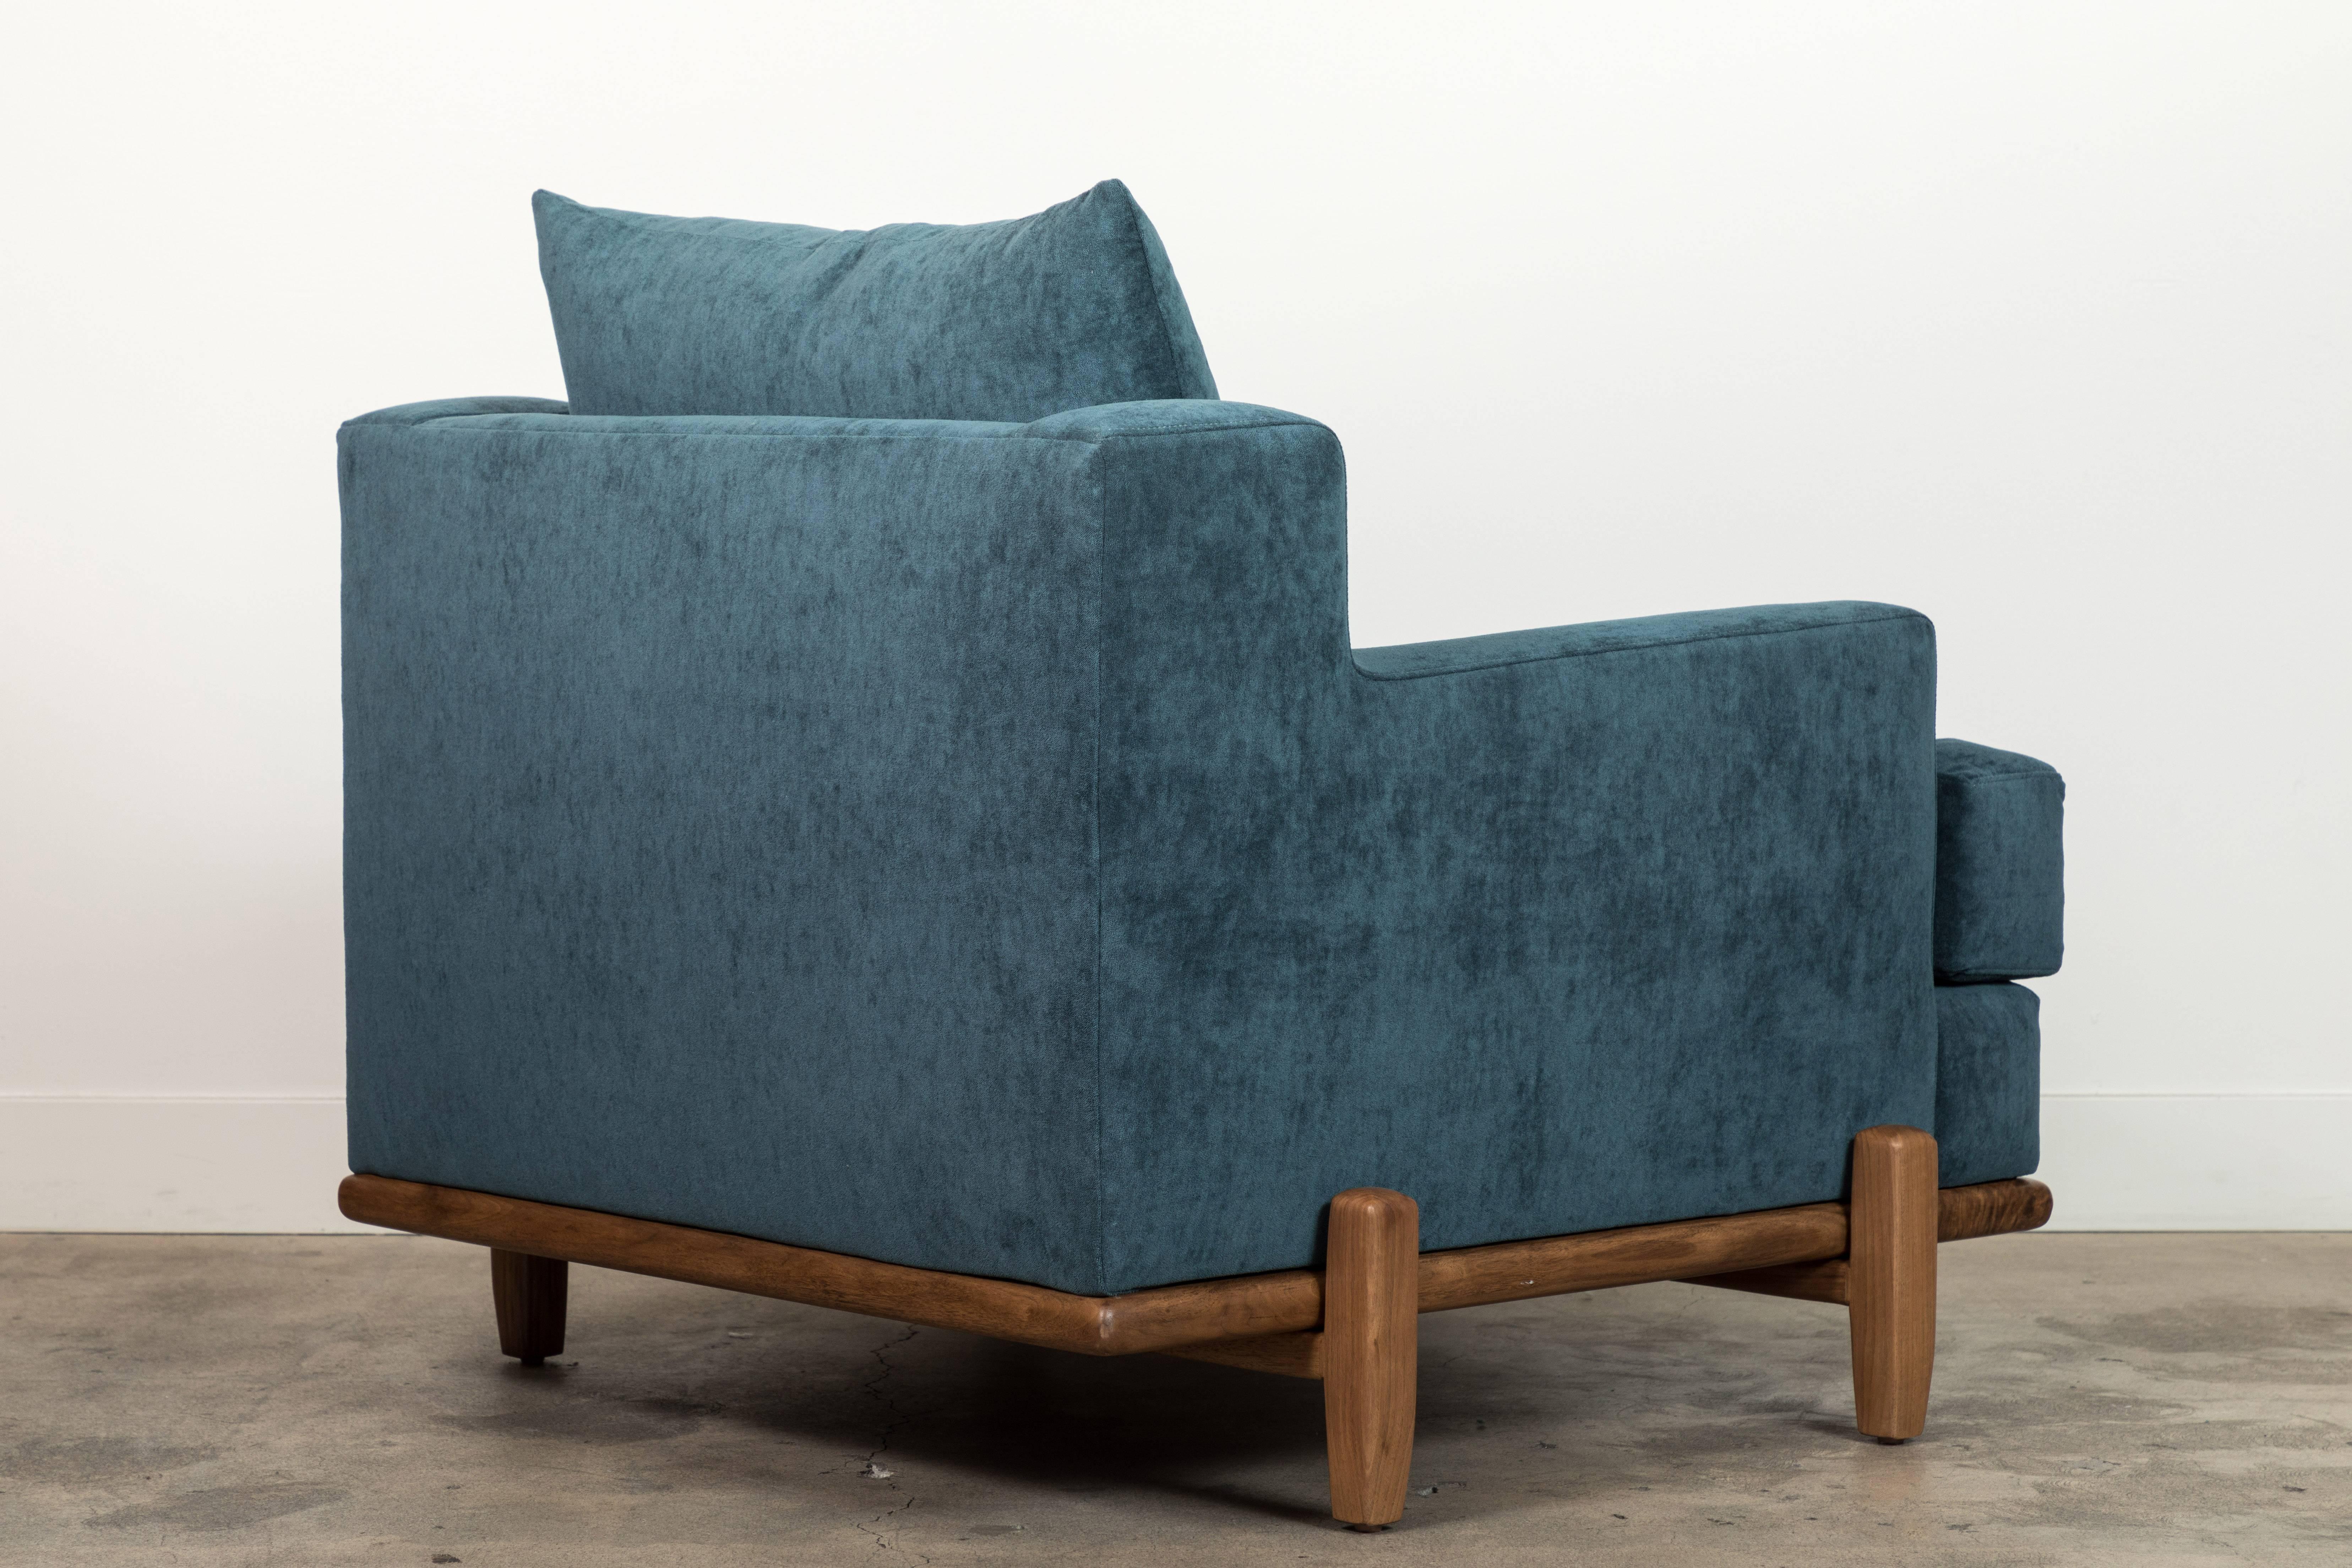 American George Chair by Brian Paquette for Lawson-Fenning